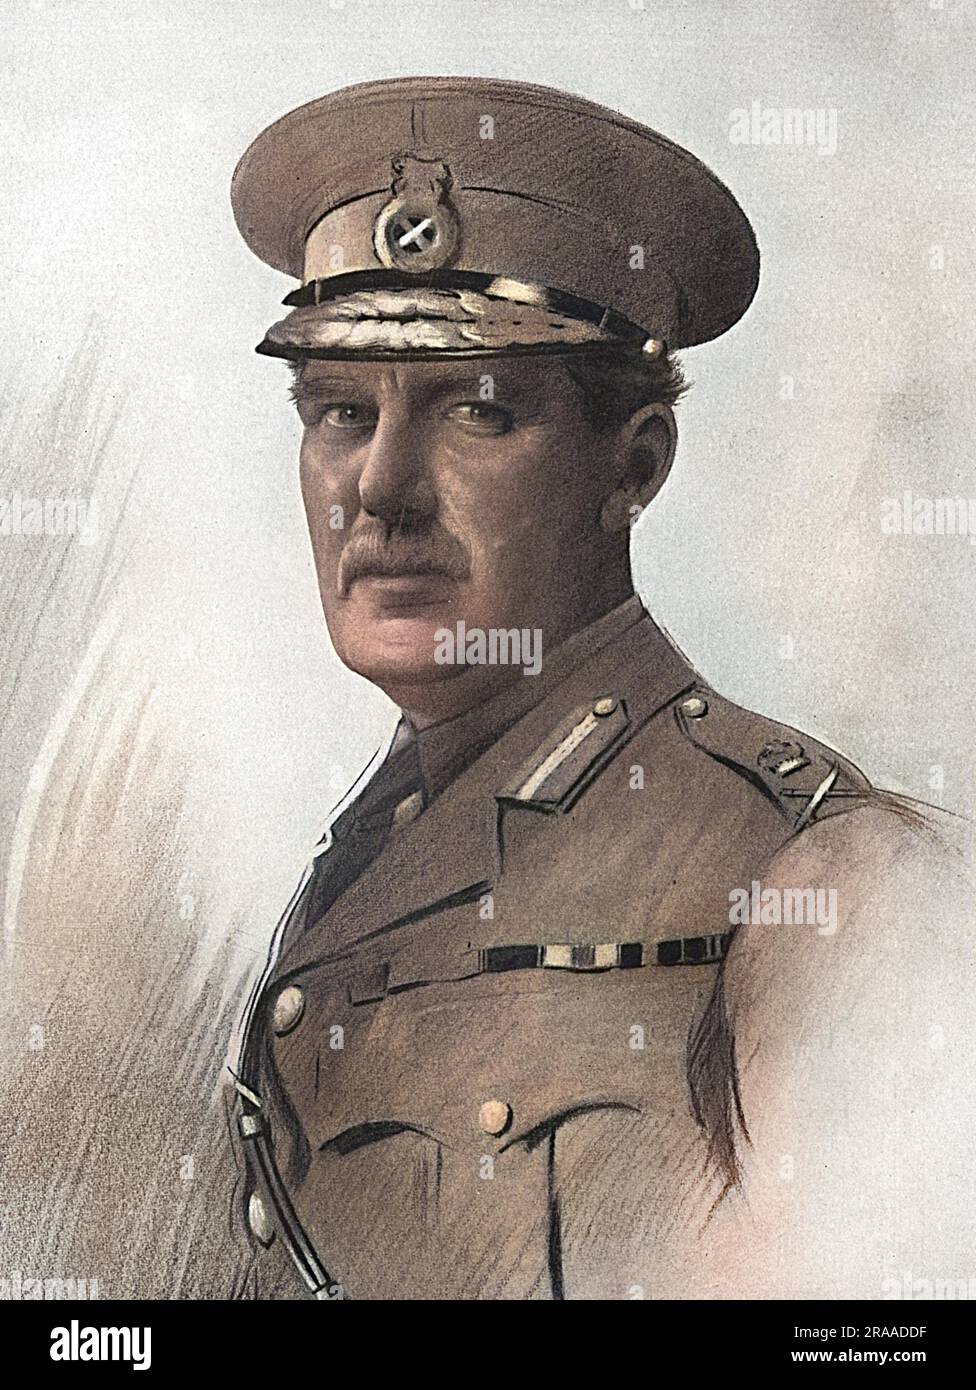 Lieutenant-General Sir John Steven Cowans, KCB, MVO (1862 - 1921), Quartermaster-General adn member of the Army Council during the Great War in a pencil portrait by Lieutenant Percival Anderson.     Date: 1917 Stock Photo